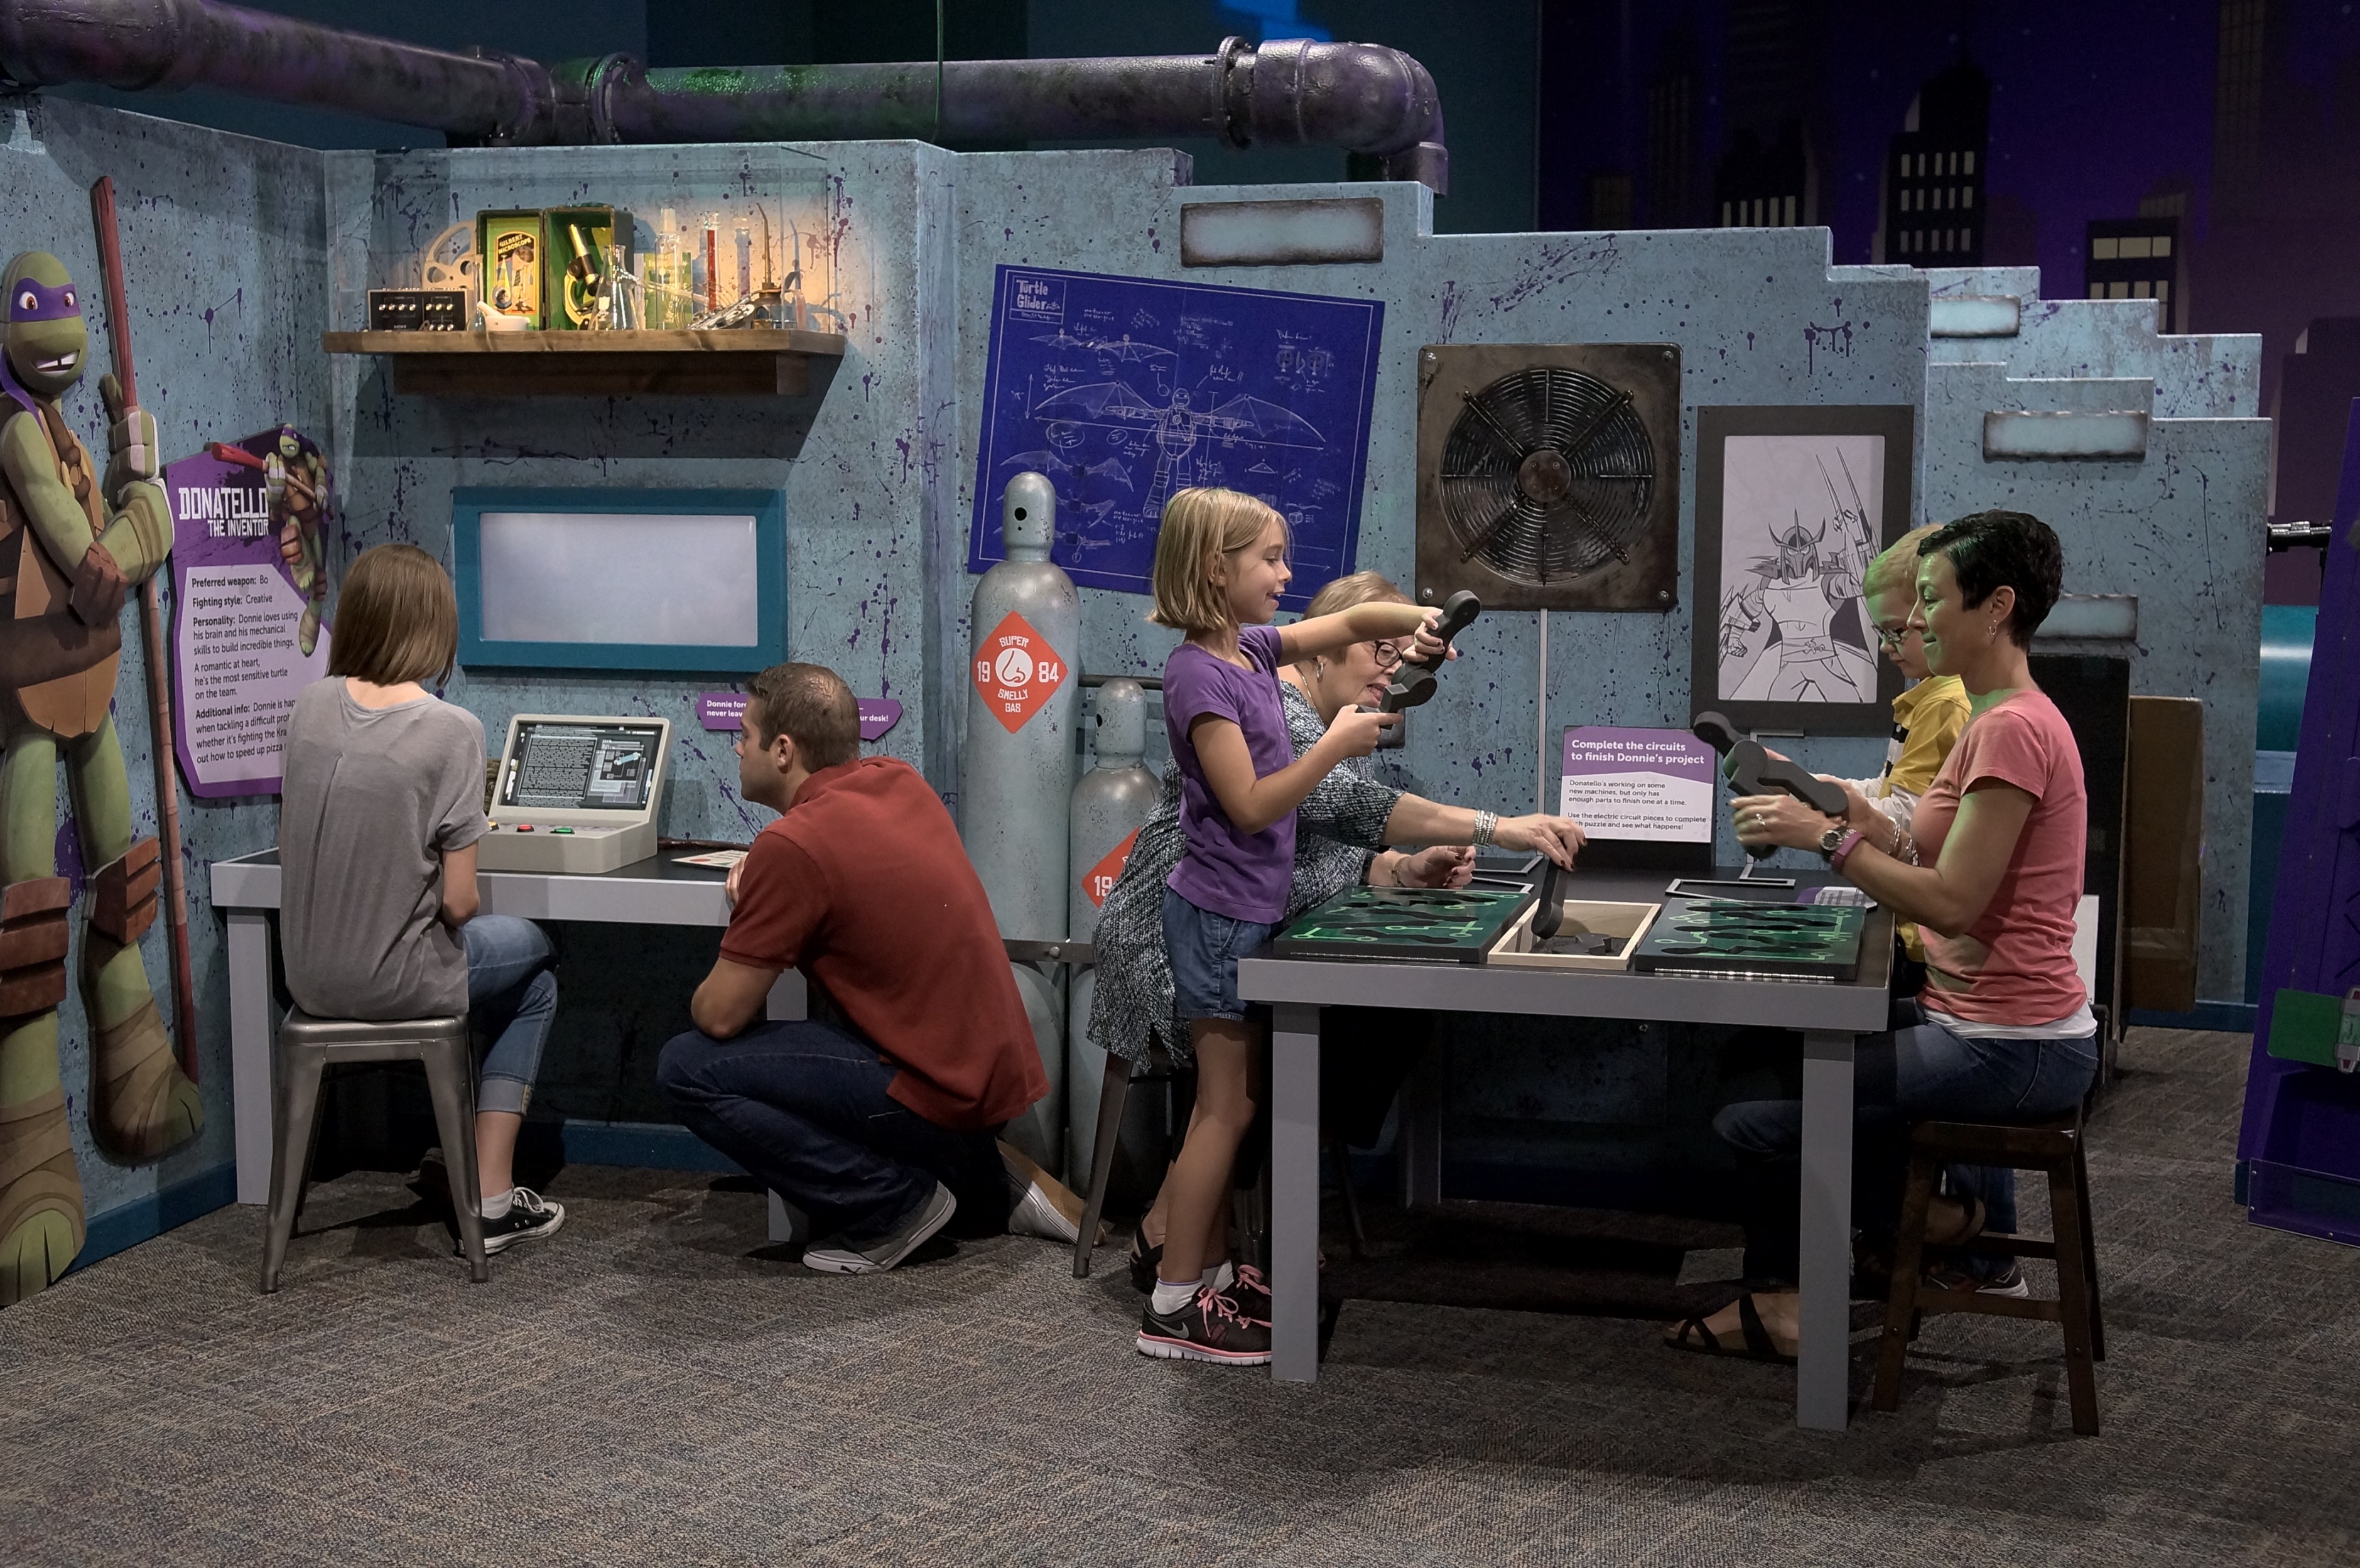 What are the secrets of the sewer? Find out with the Teenage Mutant Ninja Turtles in their first-ever museum exhibit.